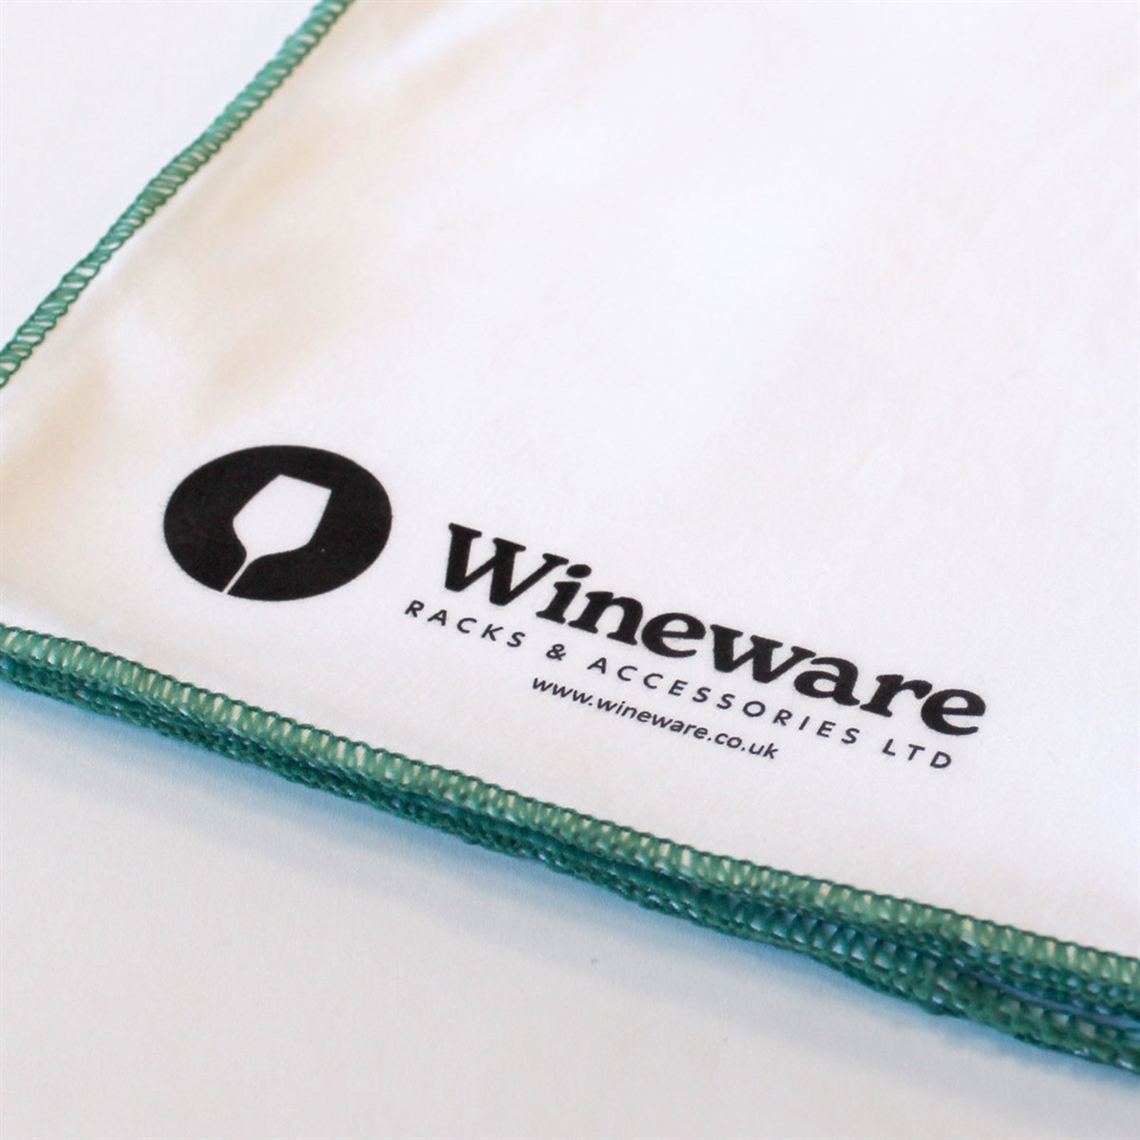 View more glassware from our Wine Glass Cleaning & Accessories range